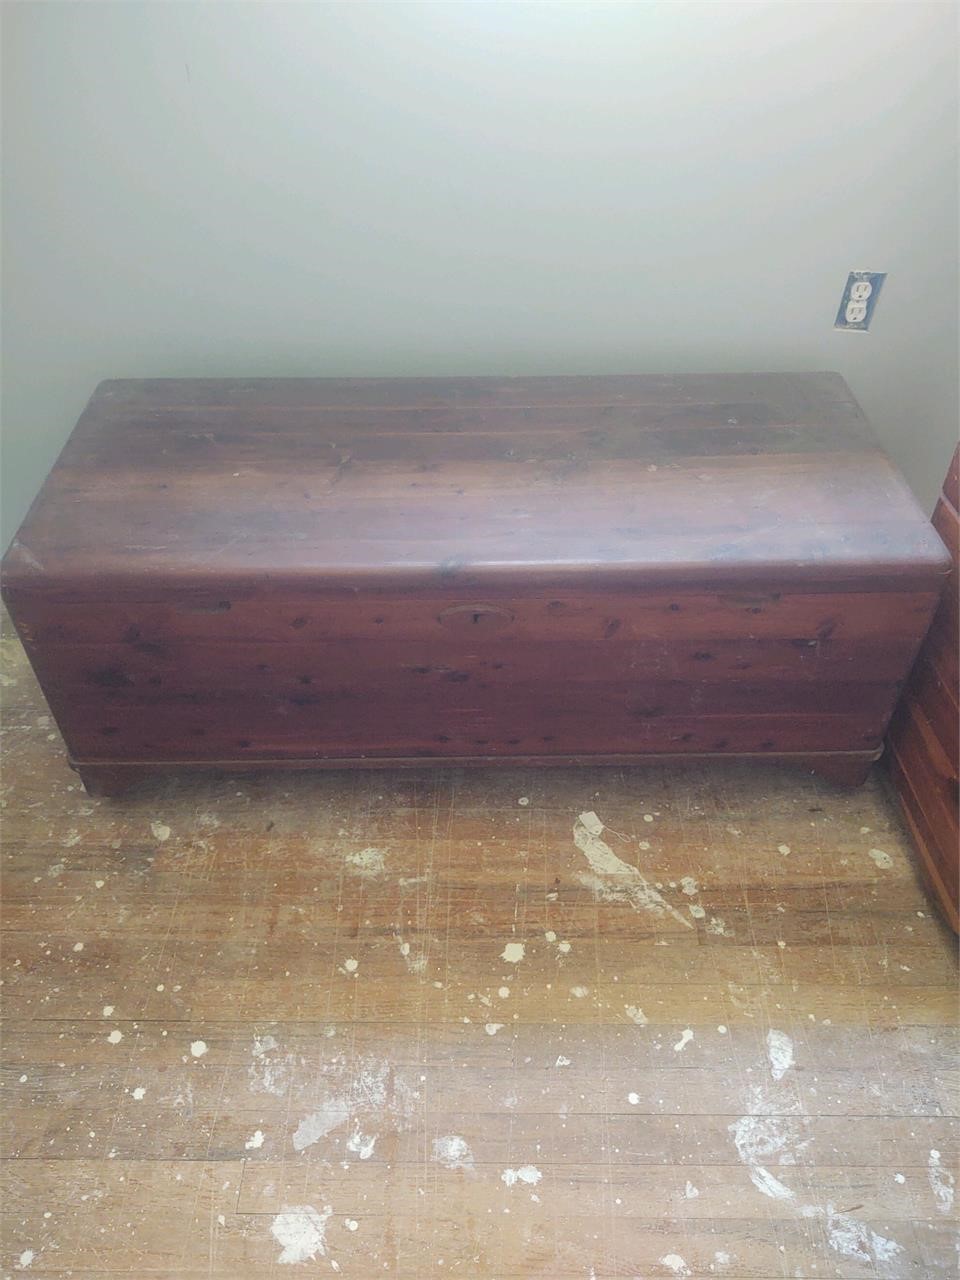 LANE Cedar Chest (contents NOT INCLUDED)